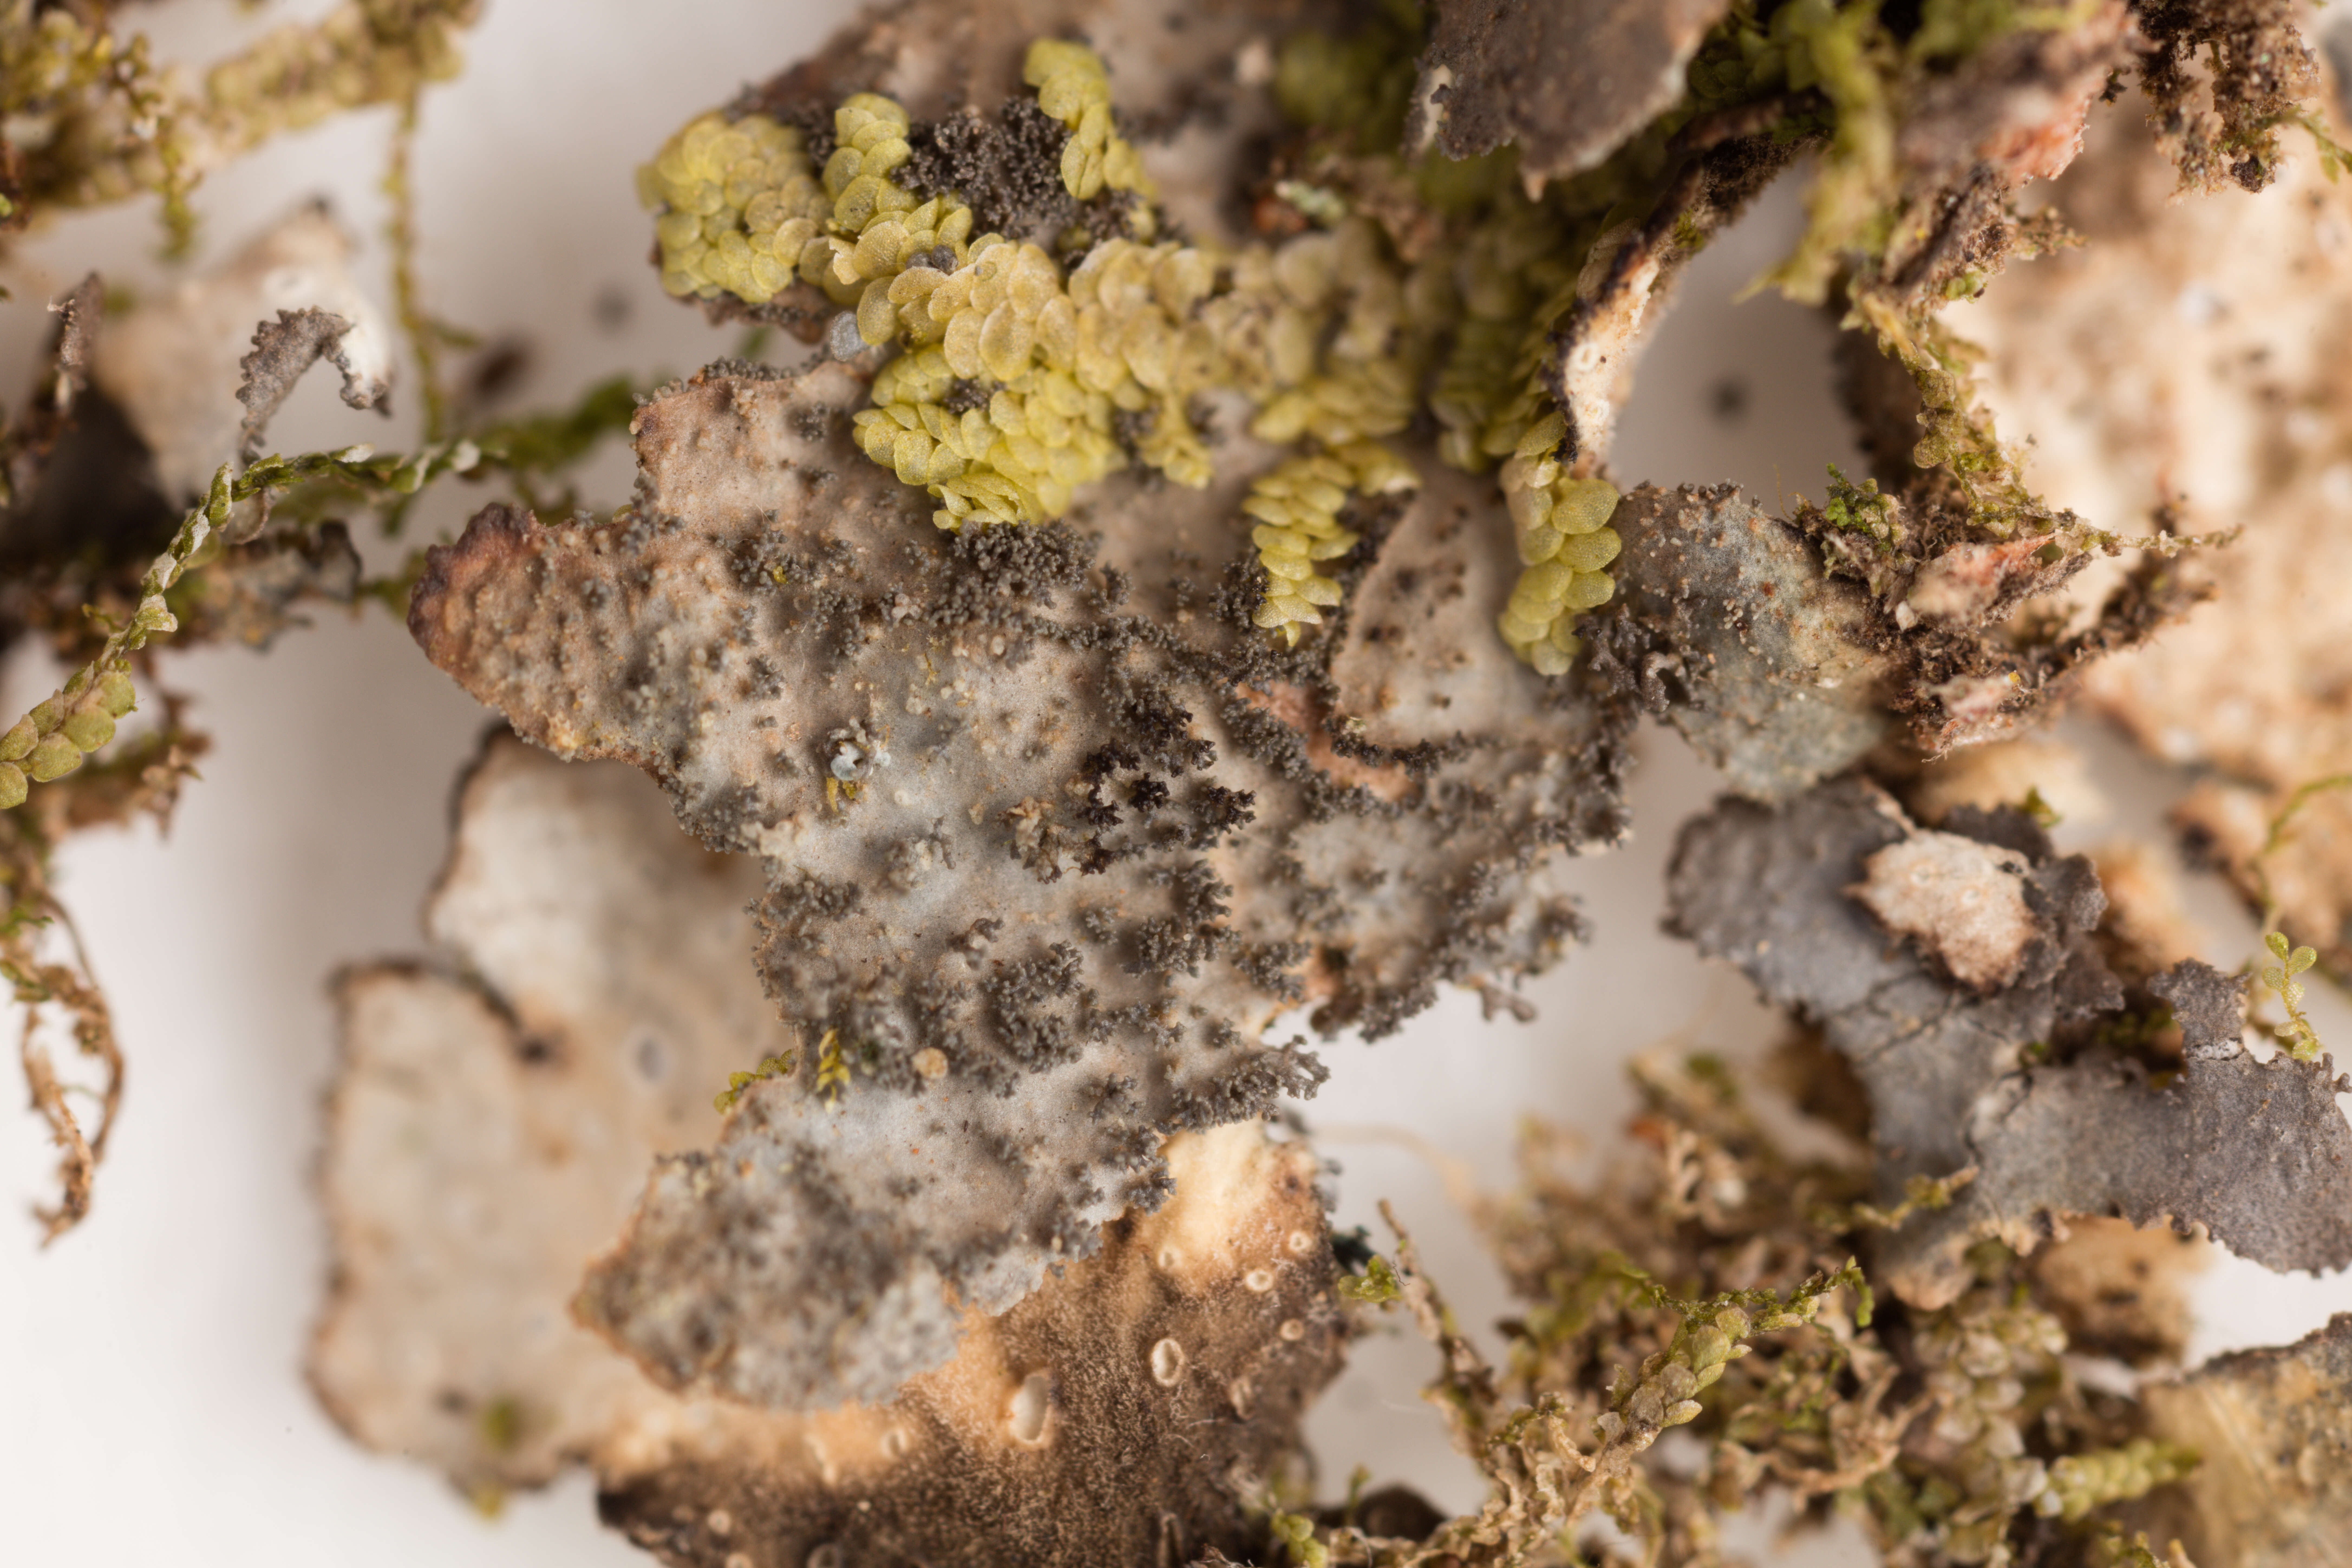 Image of spotted felt lichen